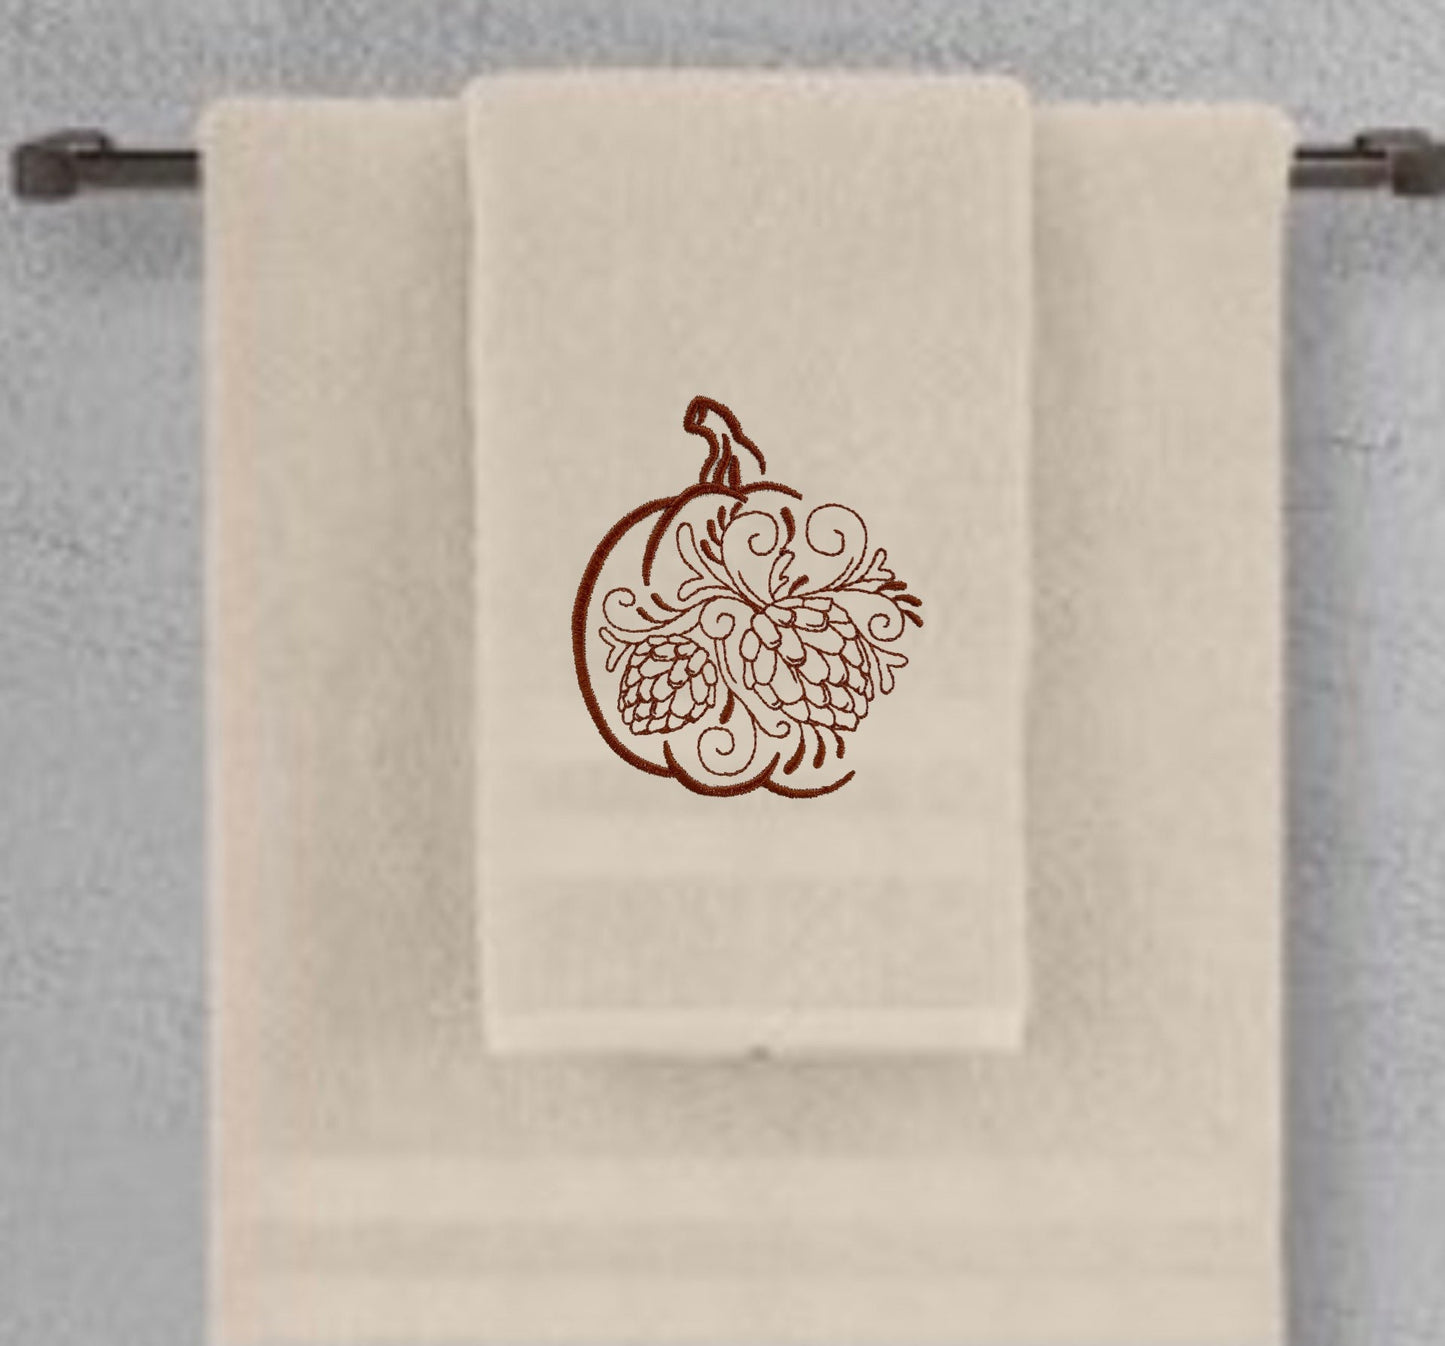 Decorative Autumn Pumpkin and Pine Cones Embroidered Bath Towels. 100% Cotton Hand or Fingertip Towel